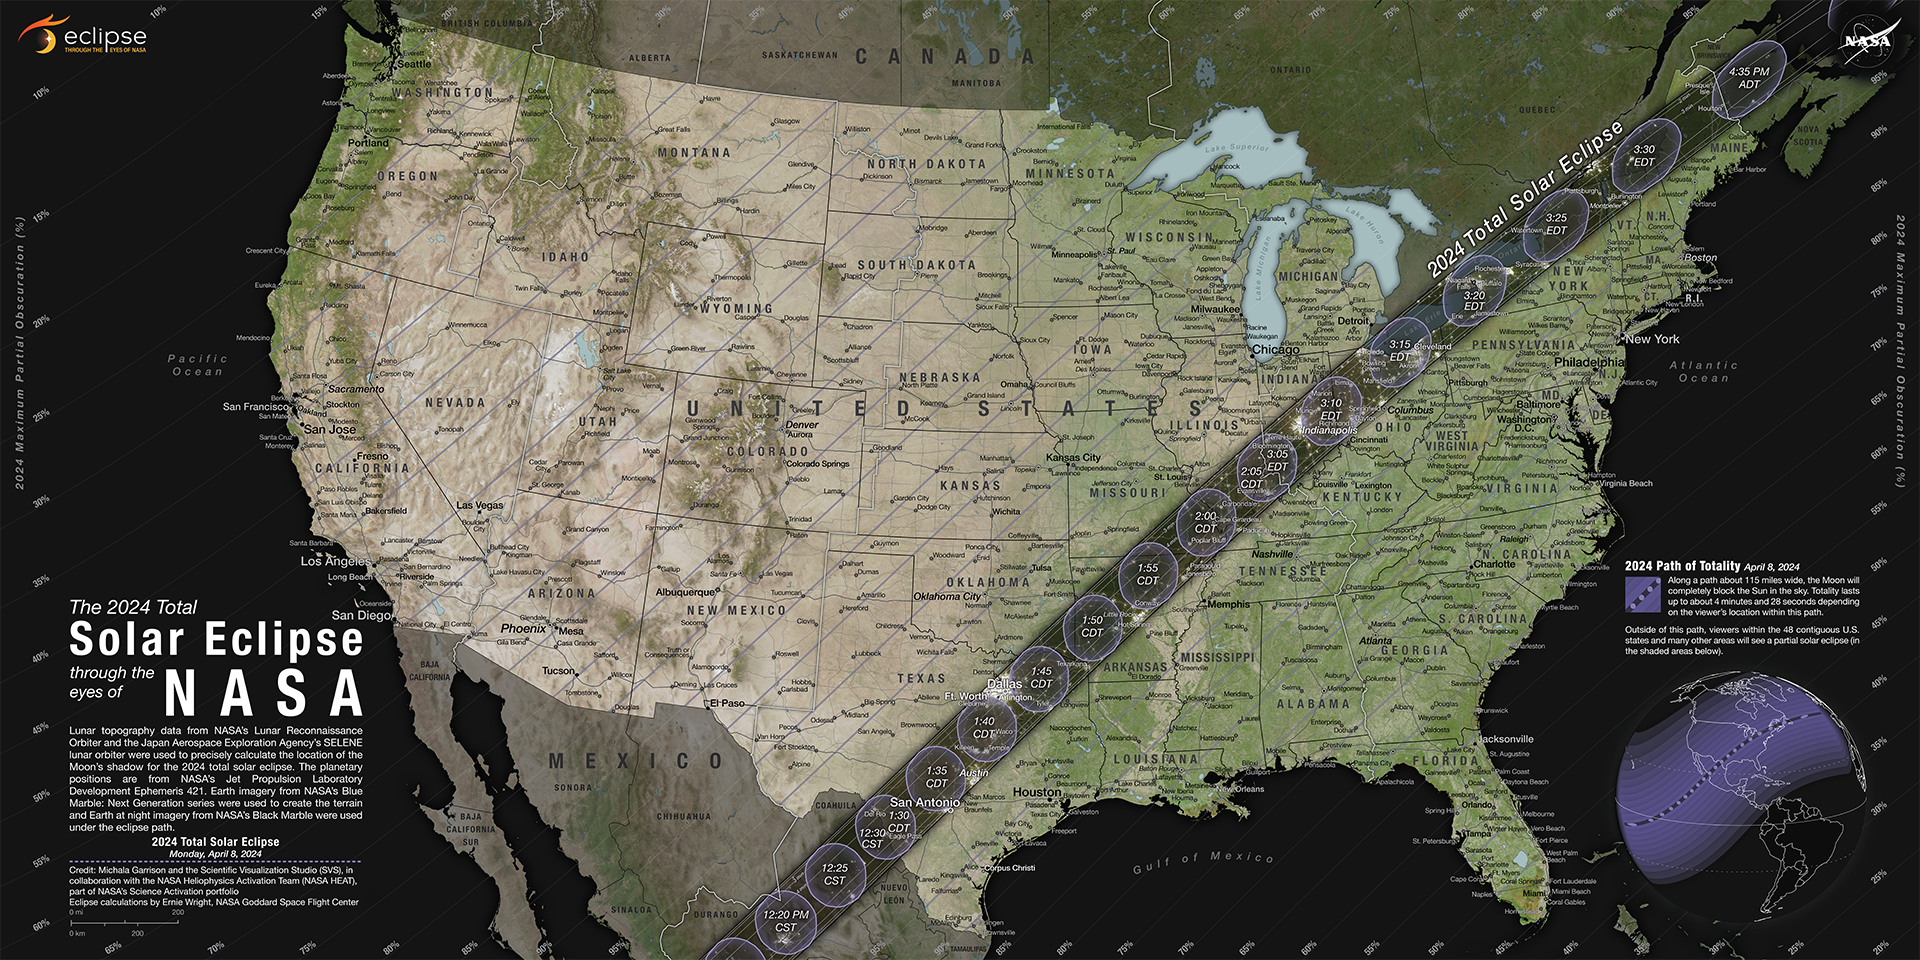 Path of the 2024 Eclipse